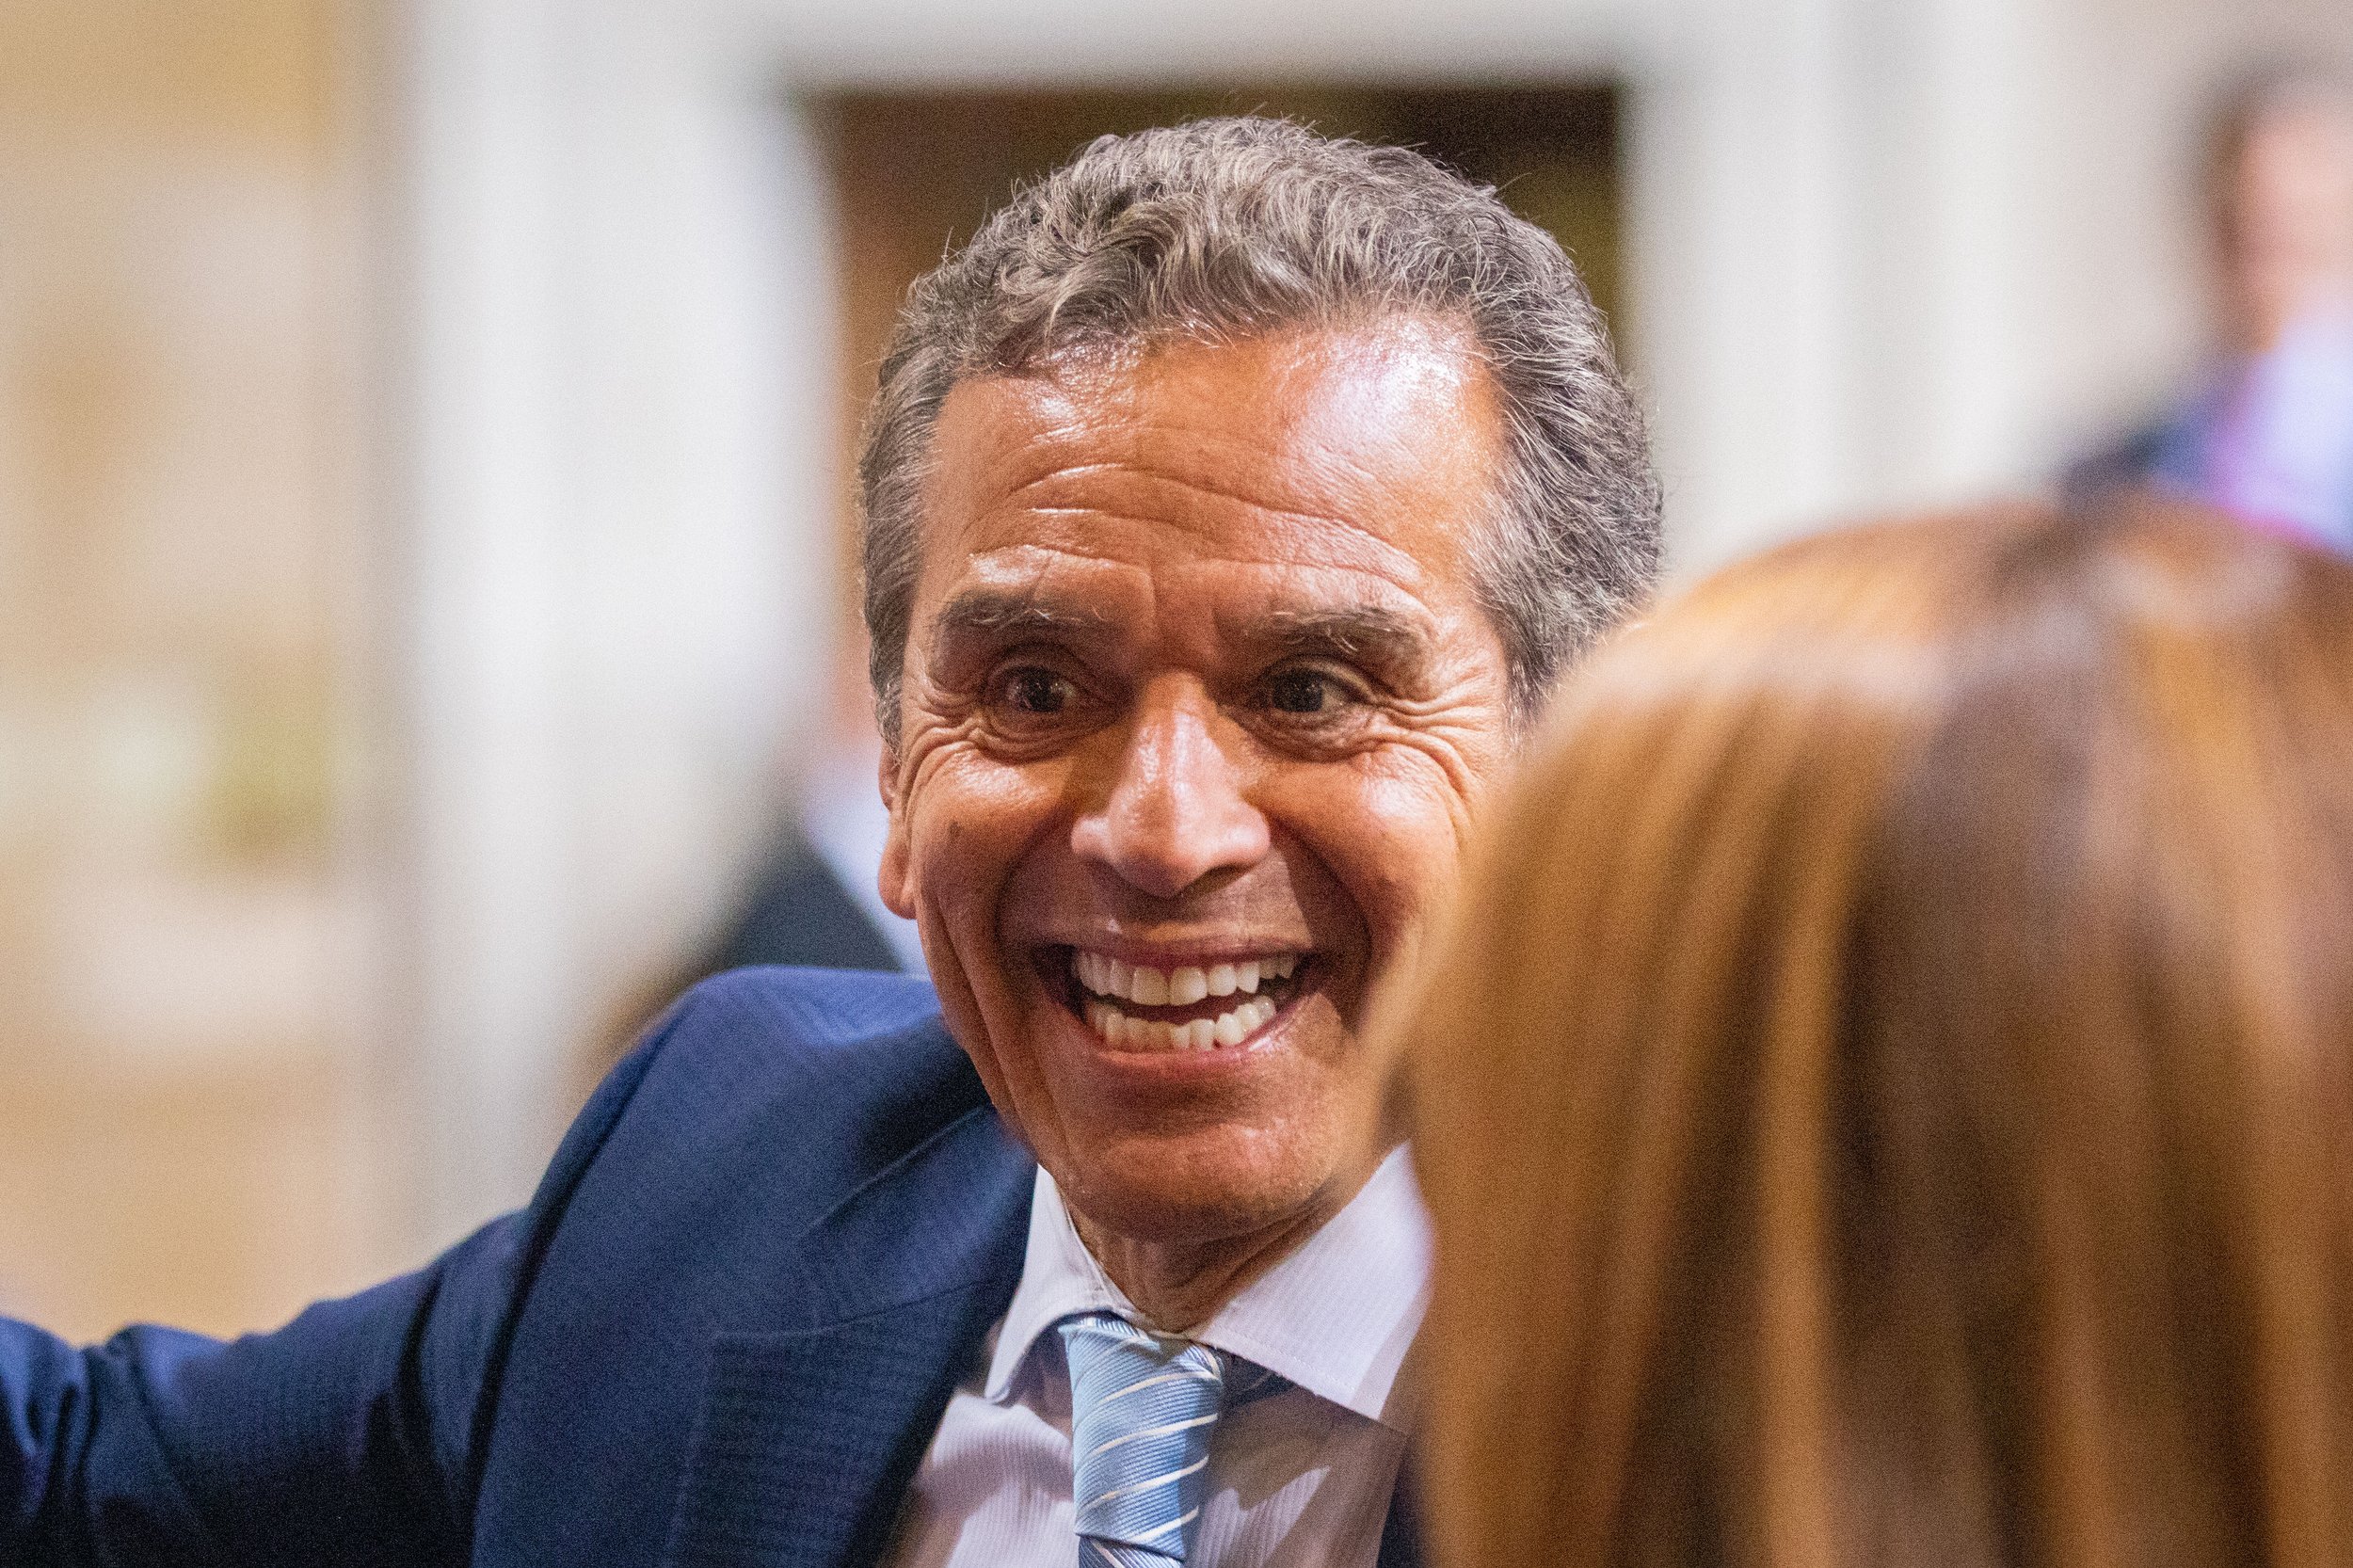  Former Los Angeles Mayor Antonio Villaraigosa (2005-2013) talking to people after current mayor Karen Bass gave her first State of the City address in the Council Chambers, in Los Angeles City Hall, Los Angeles, Calif., on Monday, April 17, 2023. As